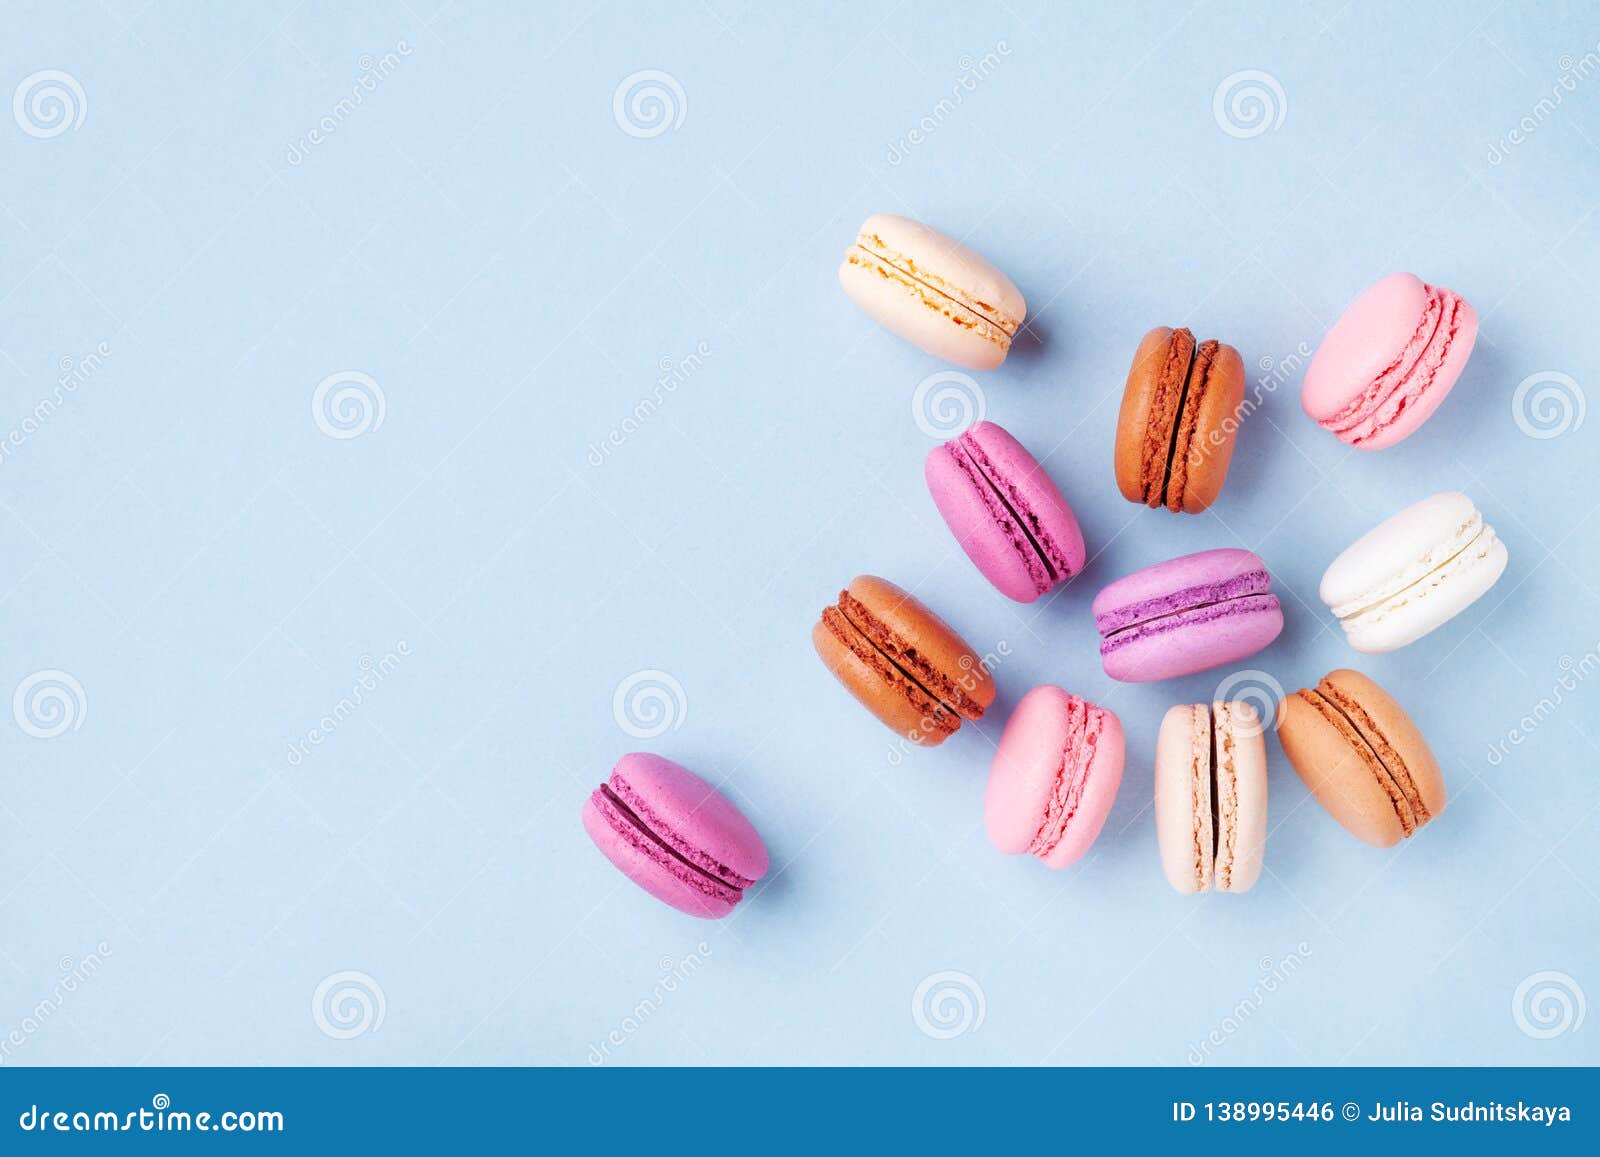 Colorful dessert macaron or macaroon on blue background top view. Flat lay style